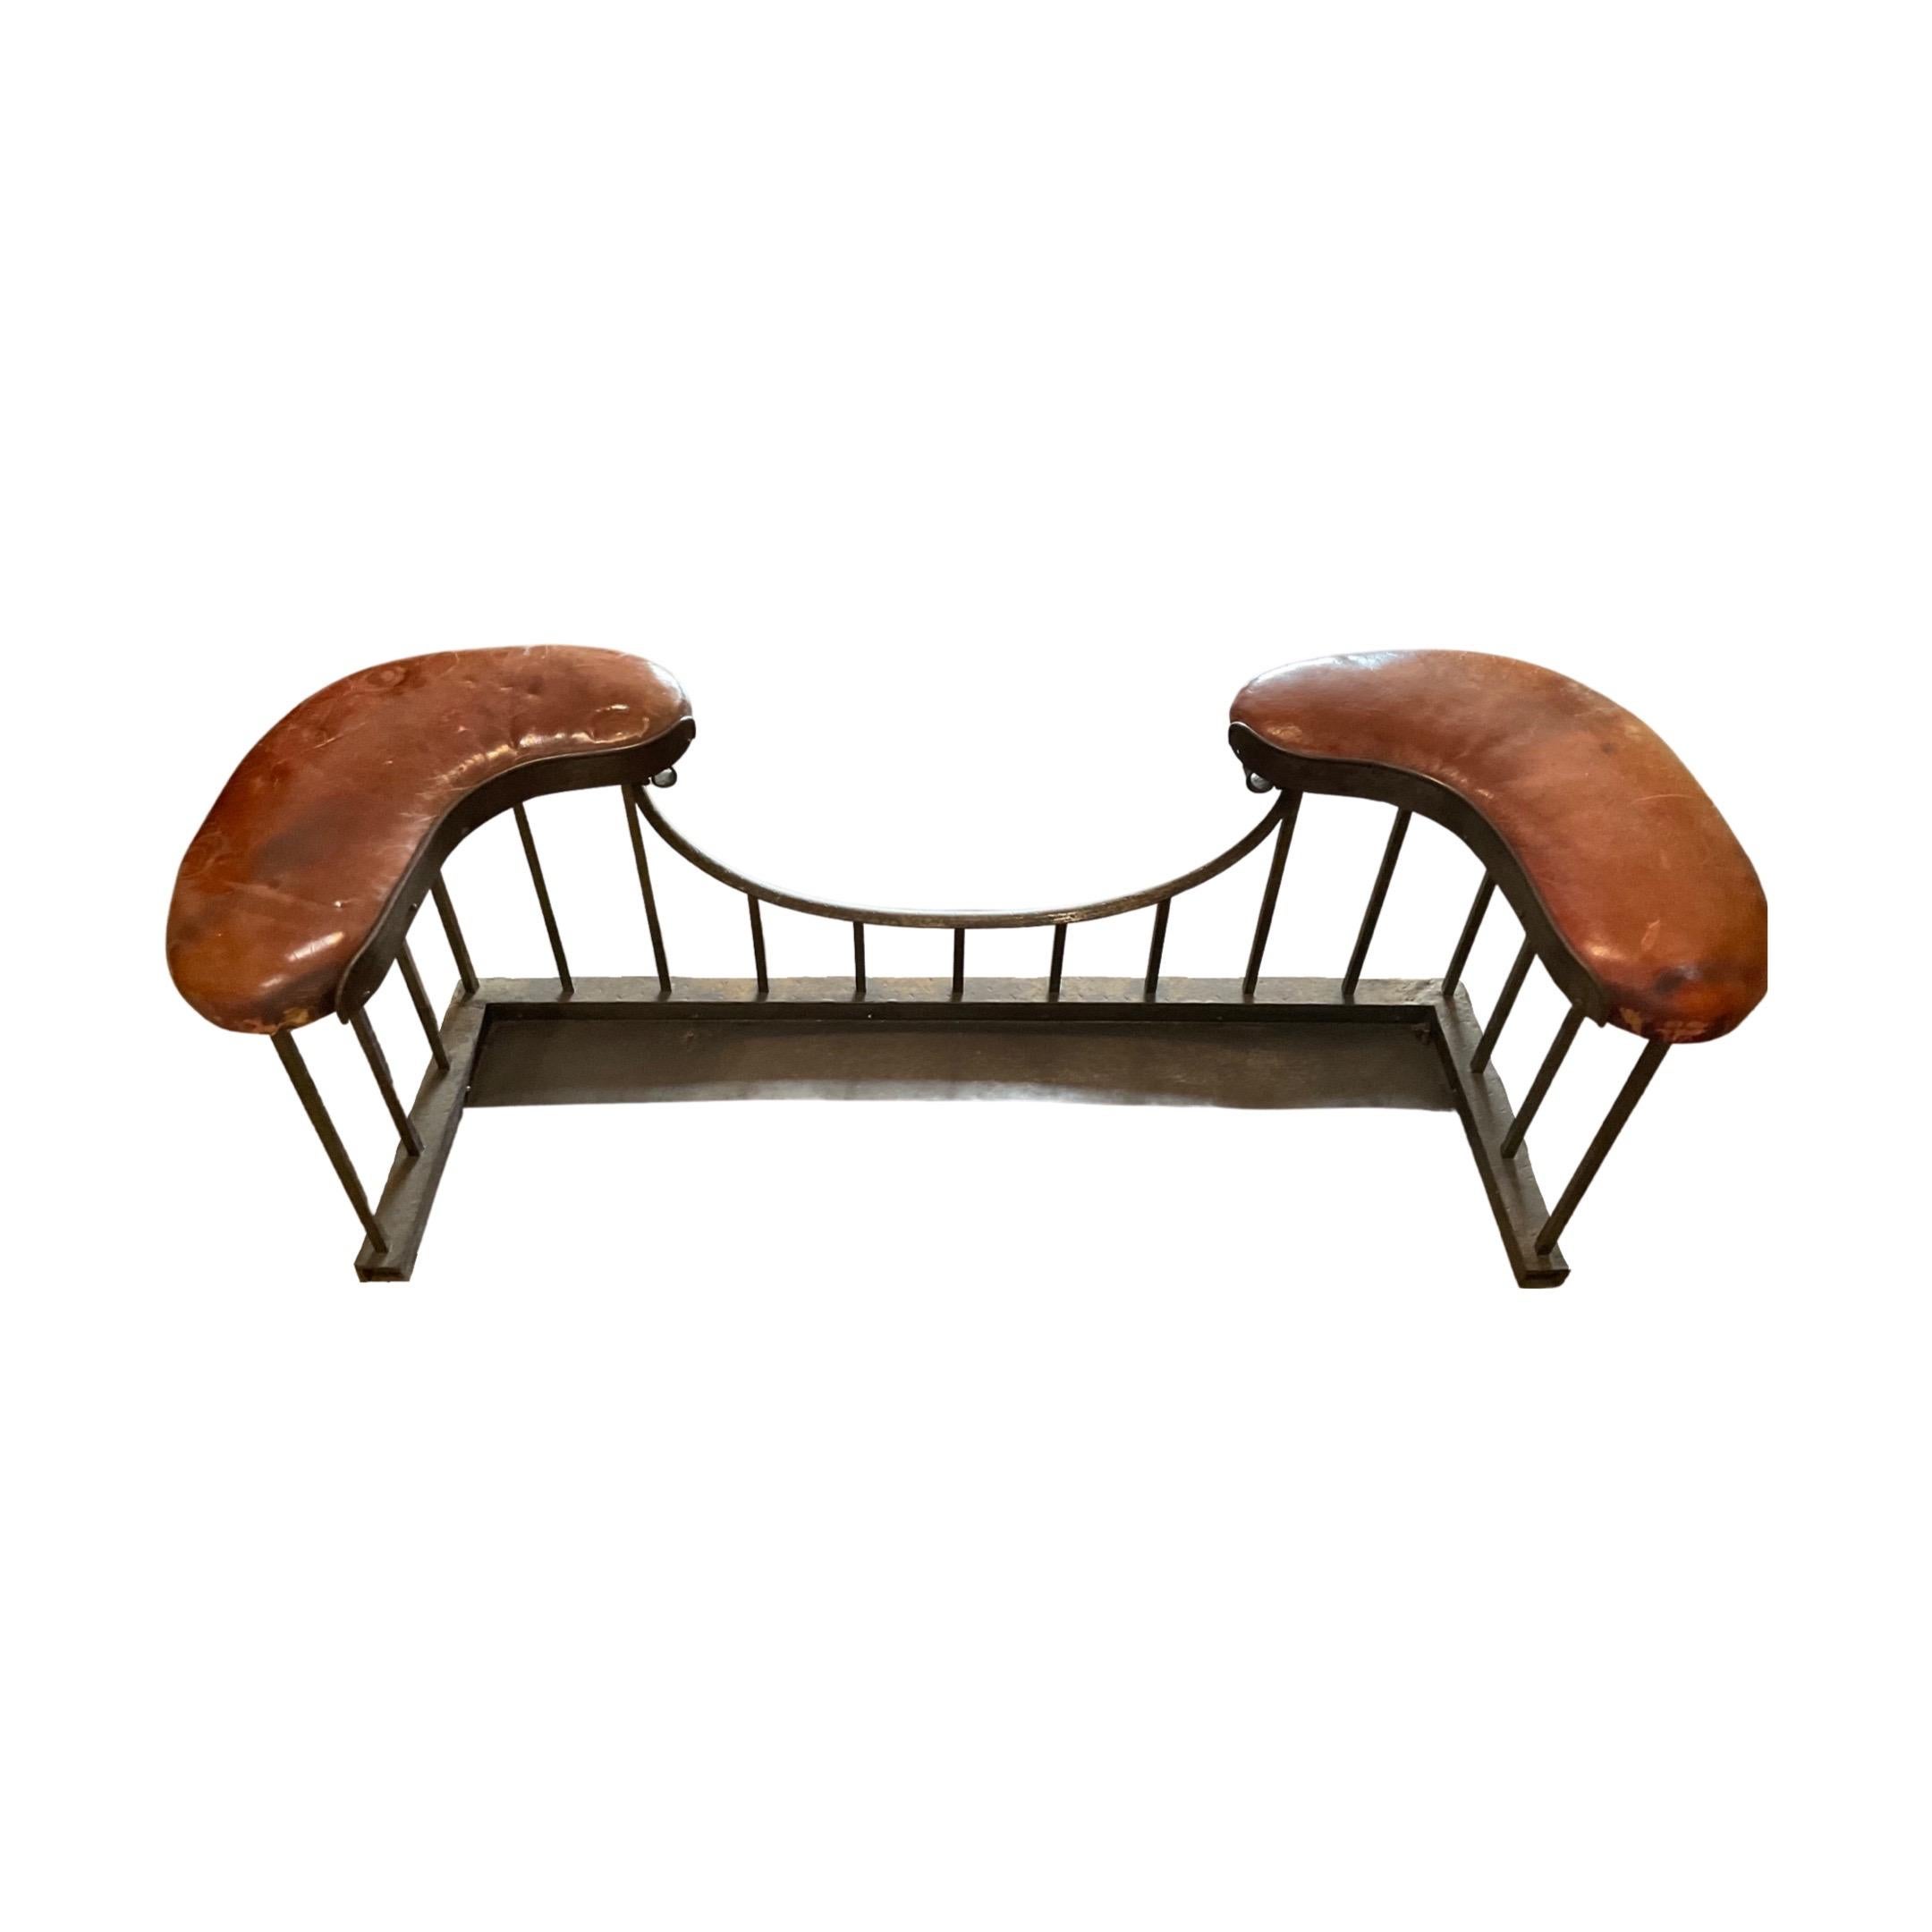 19th Century French Iron and Leather Fender Bench